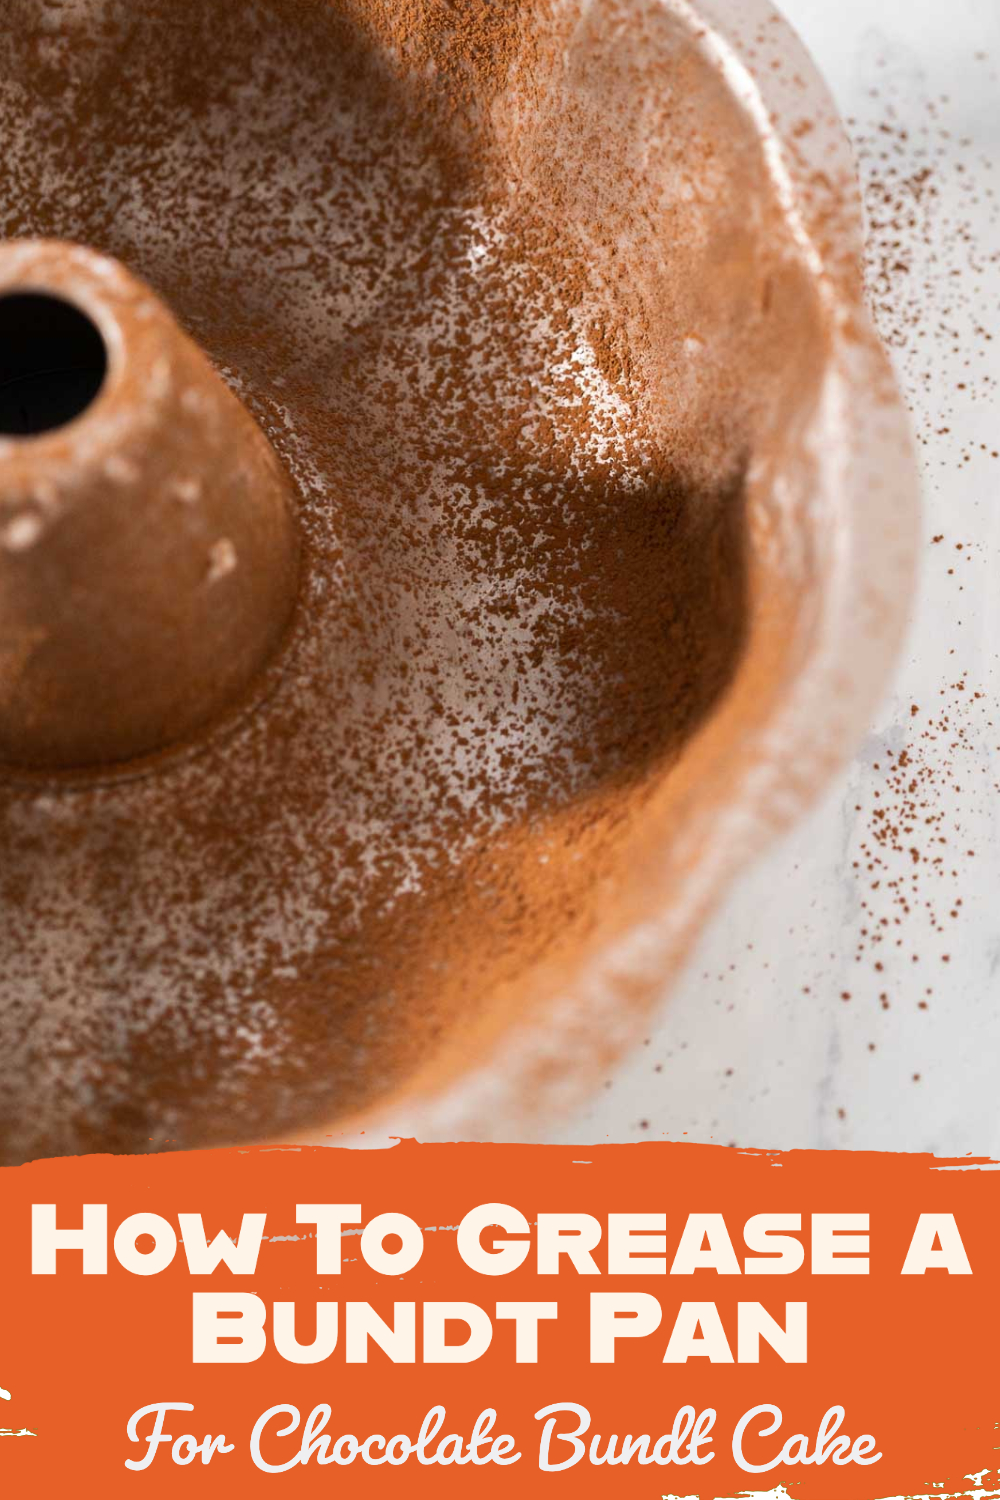 How To Grease a Bundt Pan For Chocolate Bundt Cake